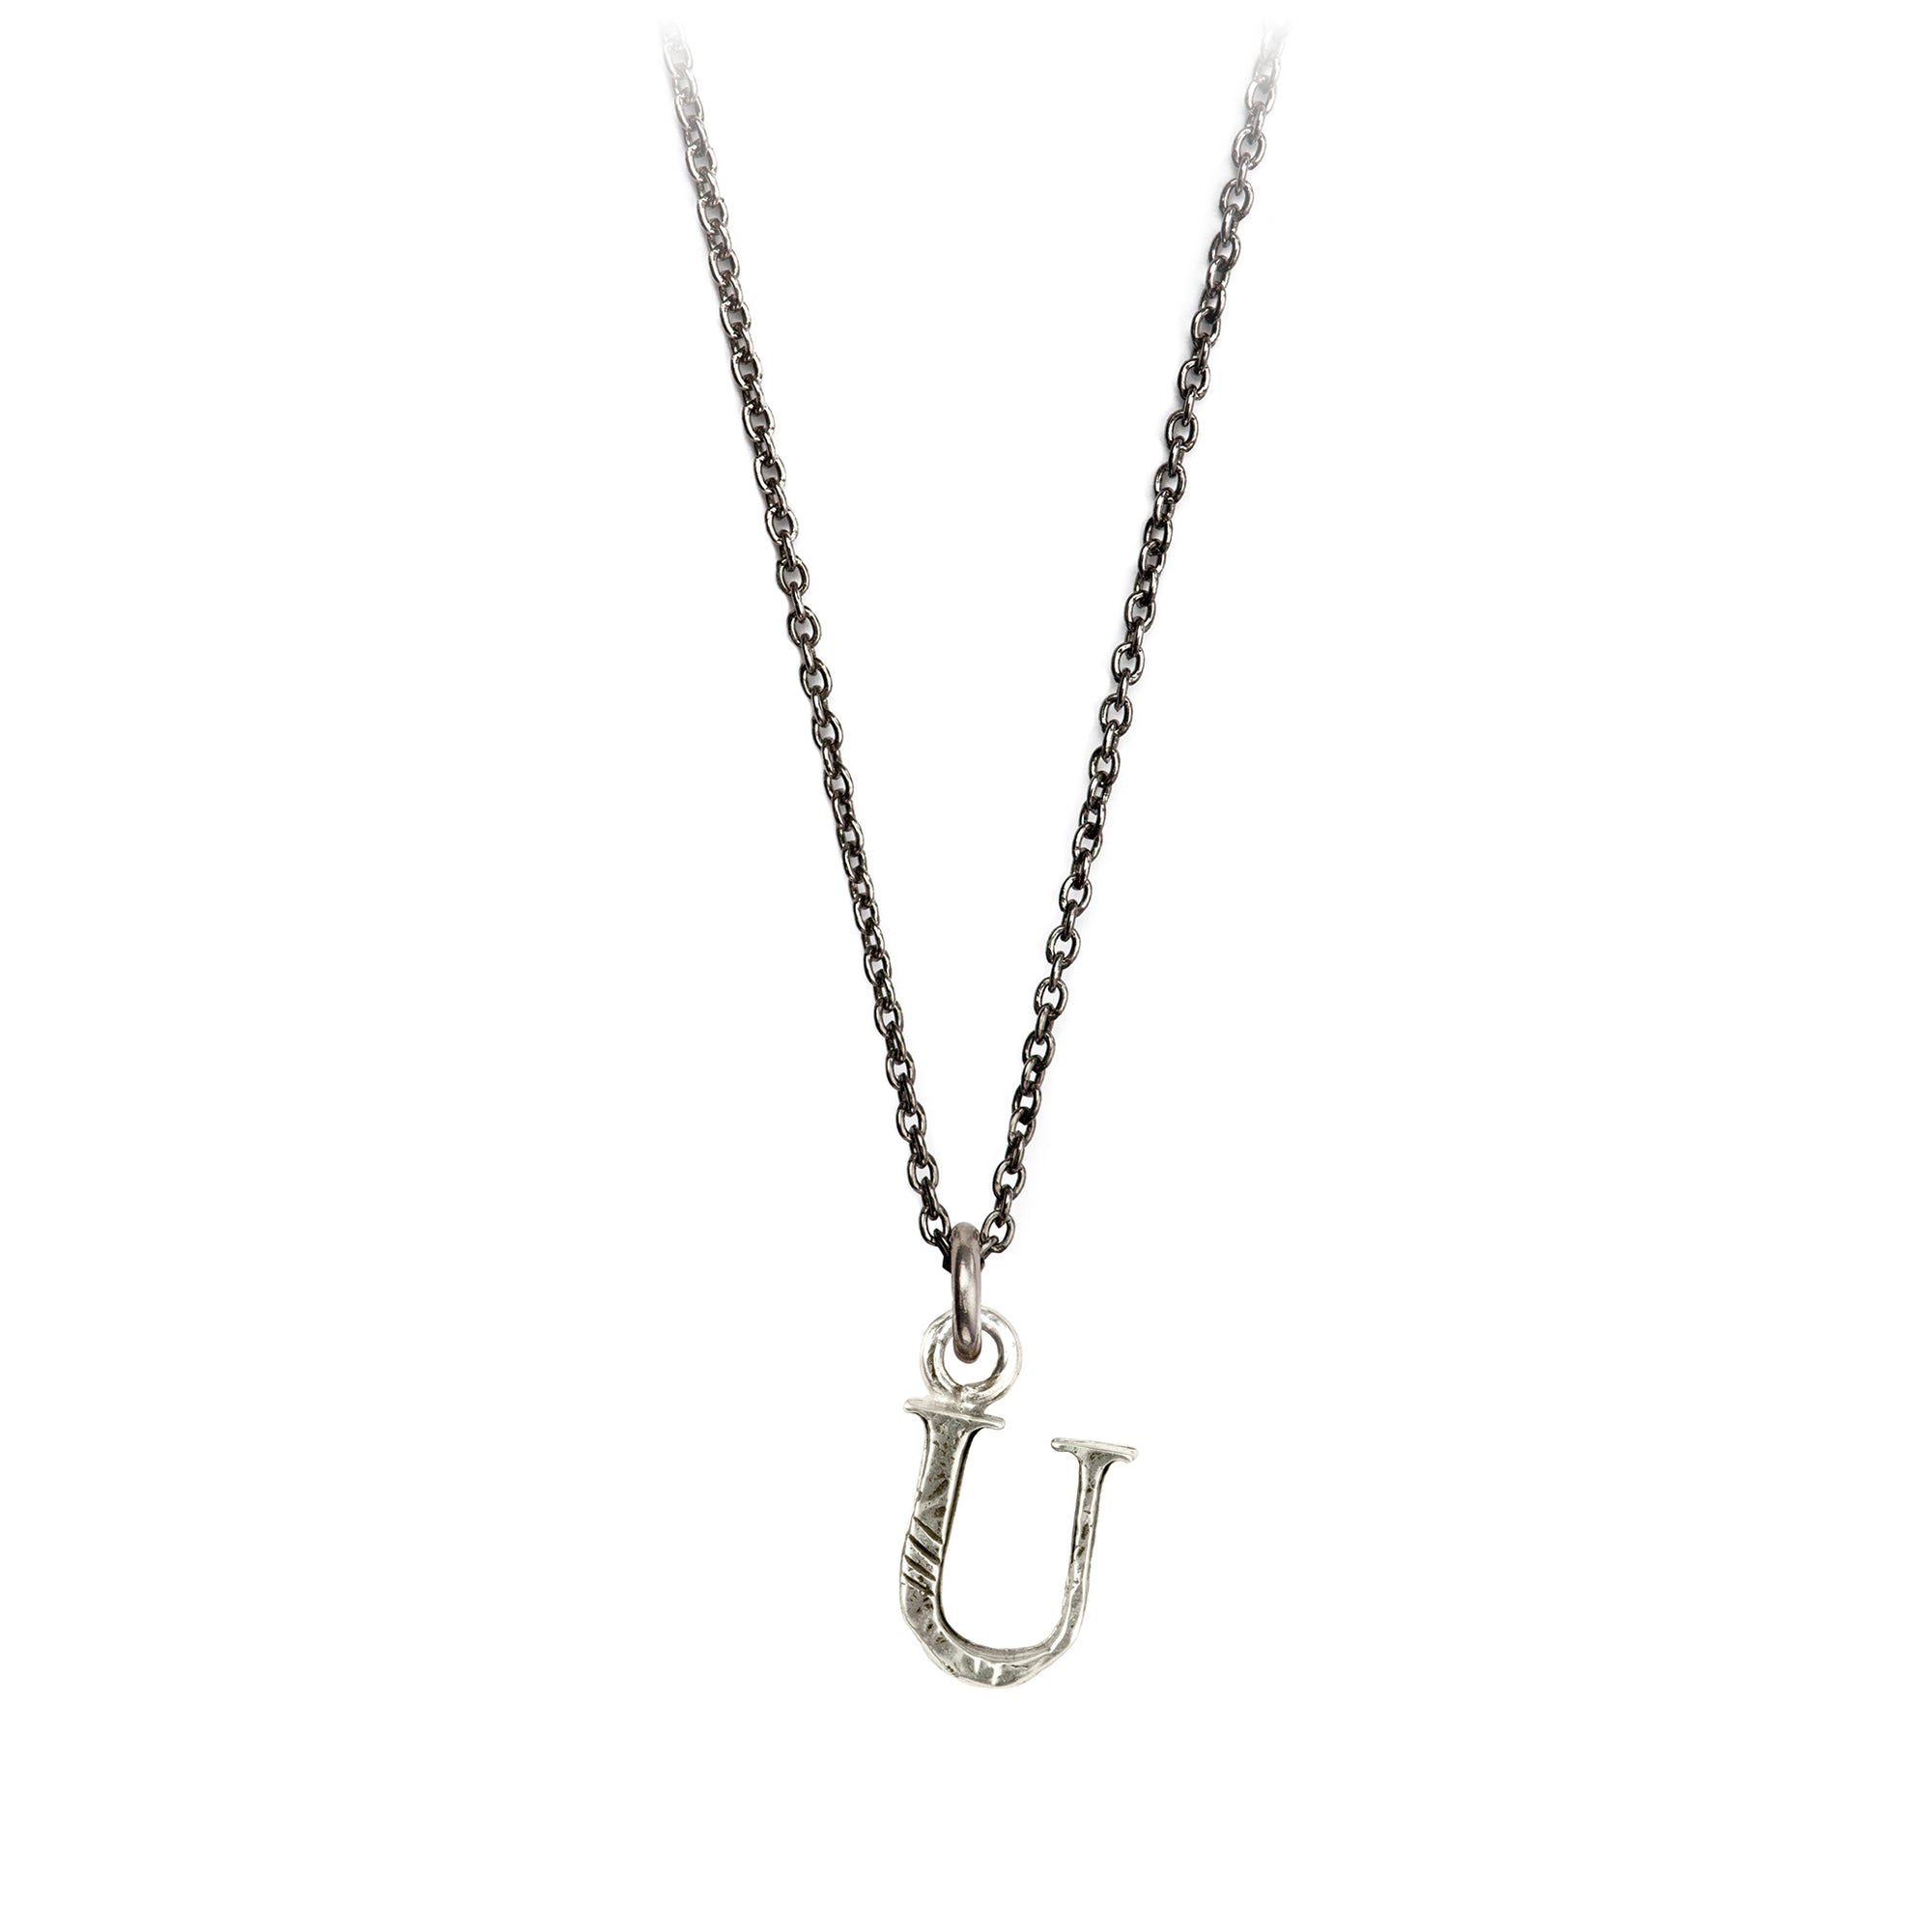 A sterling silver letter "U" charm on a silver chain.